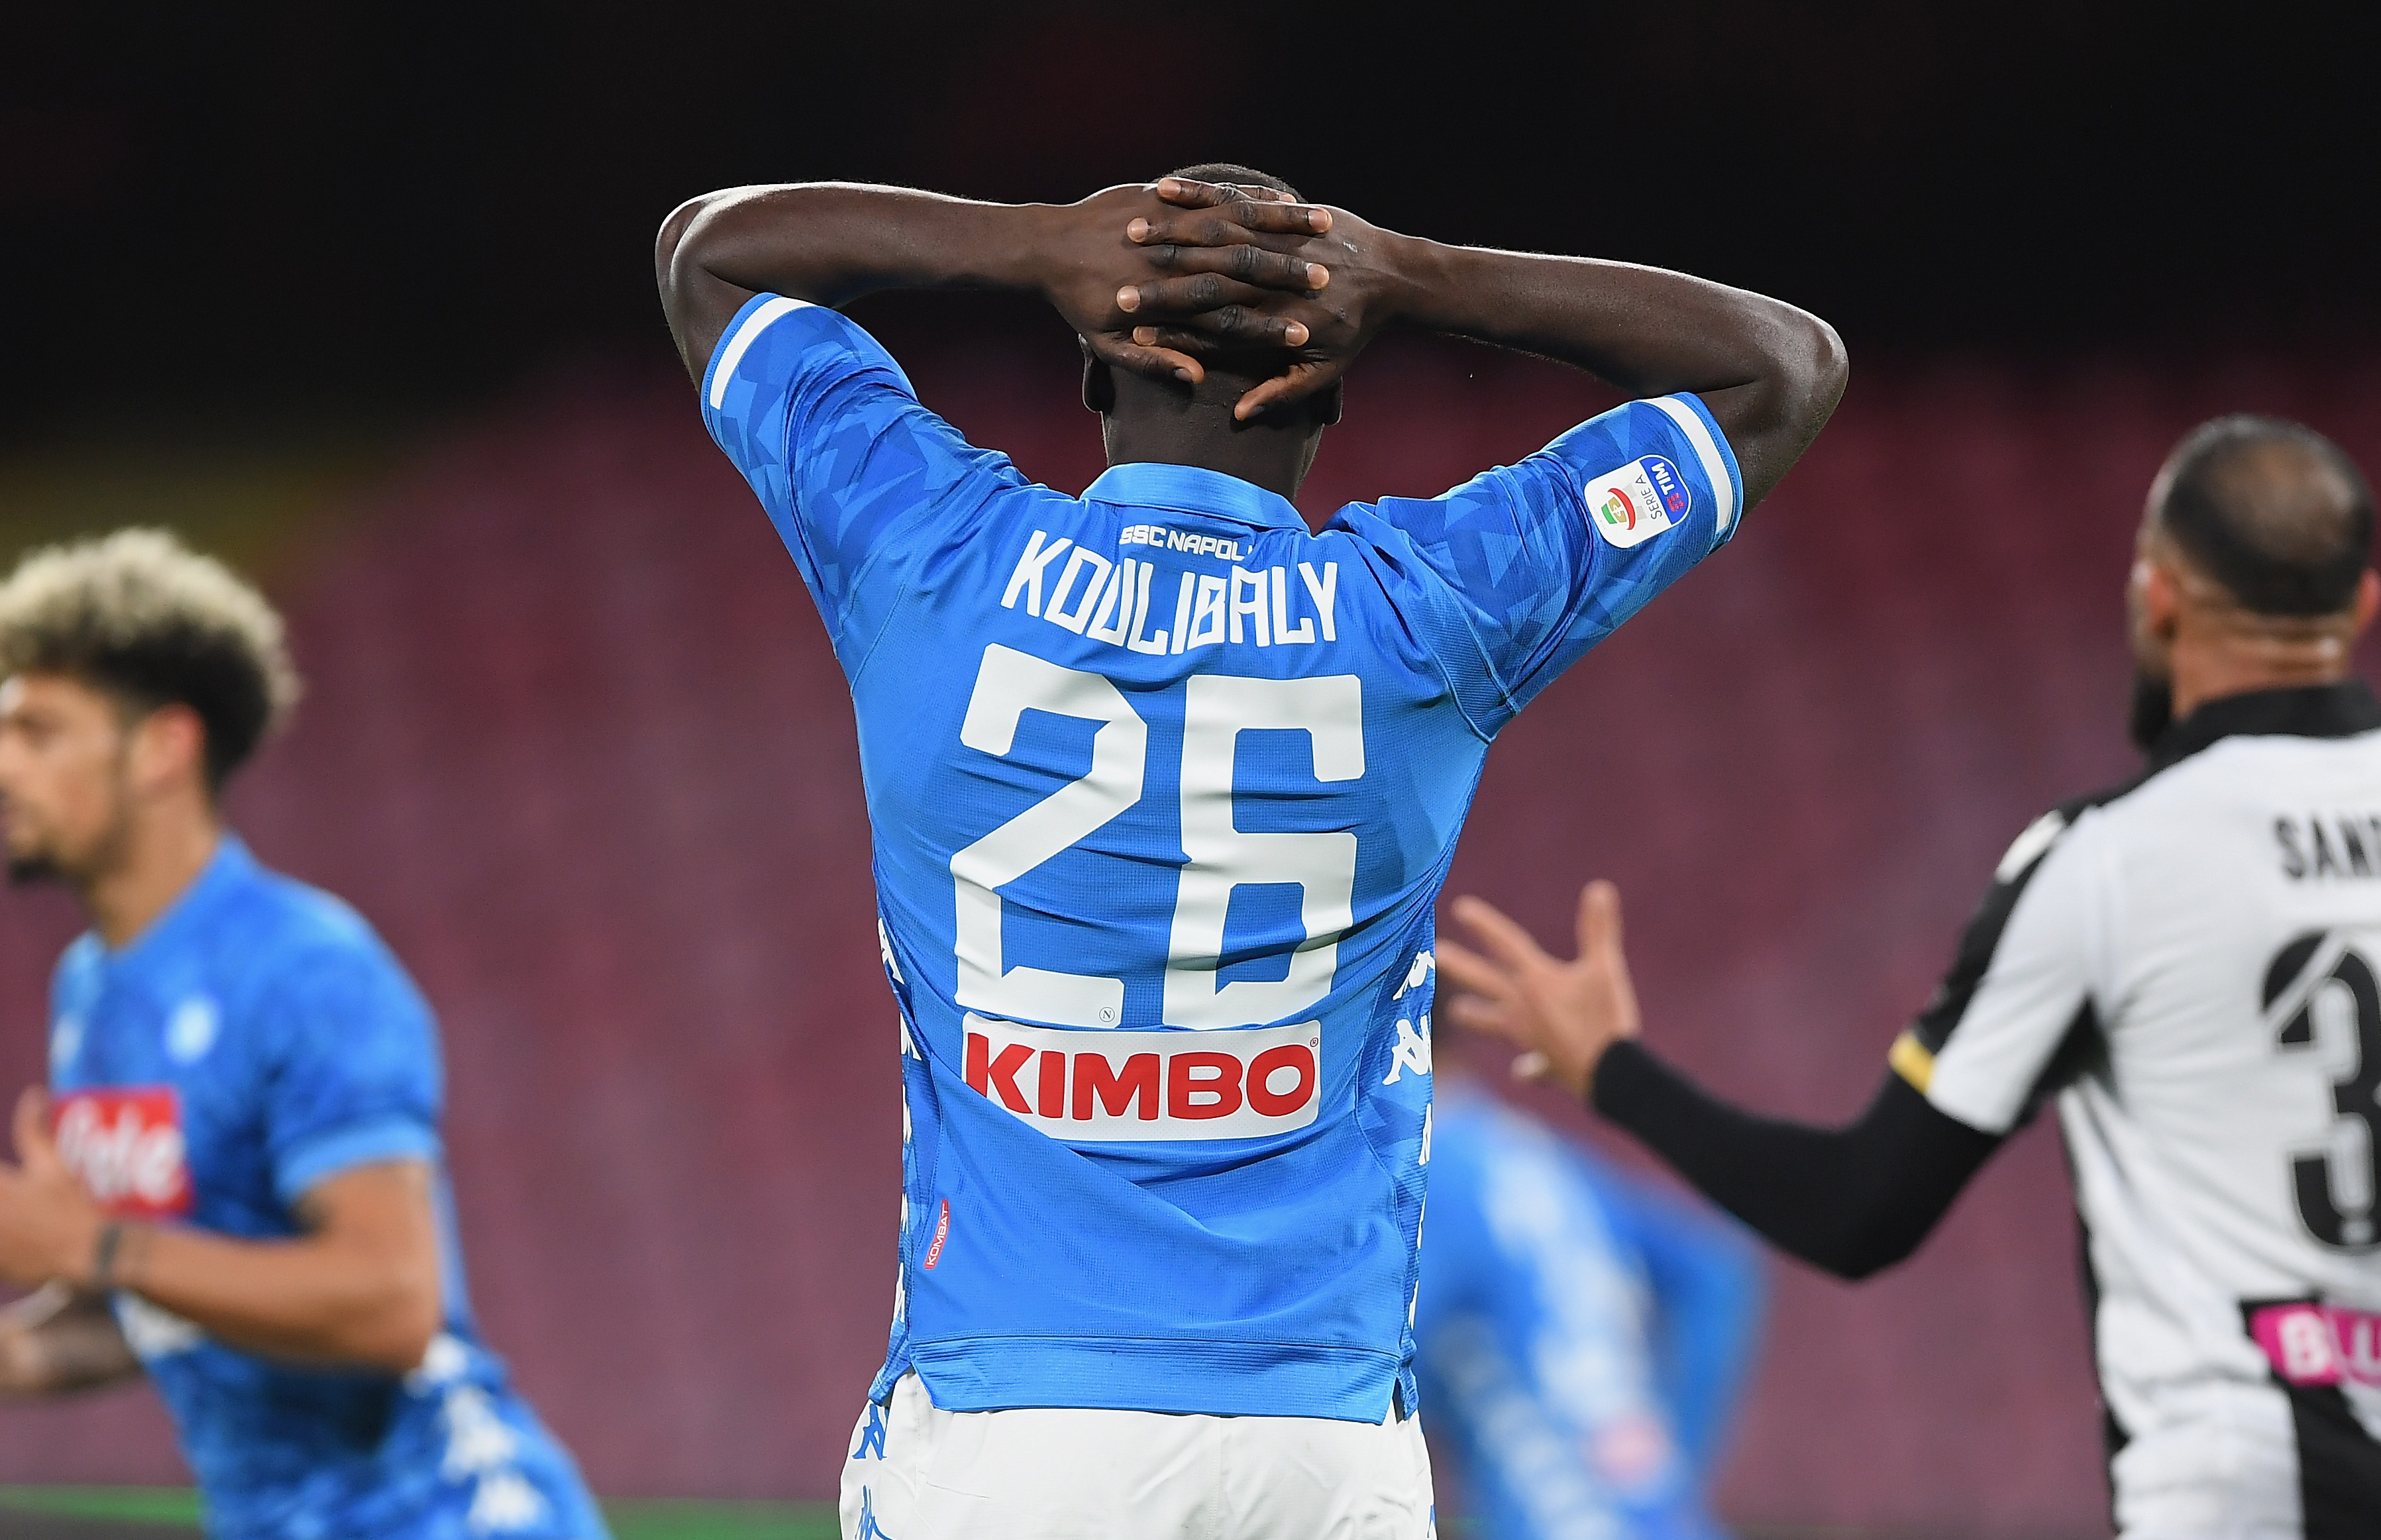 NAPLES, ITALY - MARCH 17: Kalidou Koulibaly of SSC Napoli stands disappointed during the Serie A match between SSC Napoli and Udinese at Stadio San Paolo on March 17, 2019 in Naples, Italy.  (Photo by Francesco Pecoraro/Getty Images)